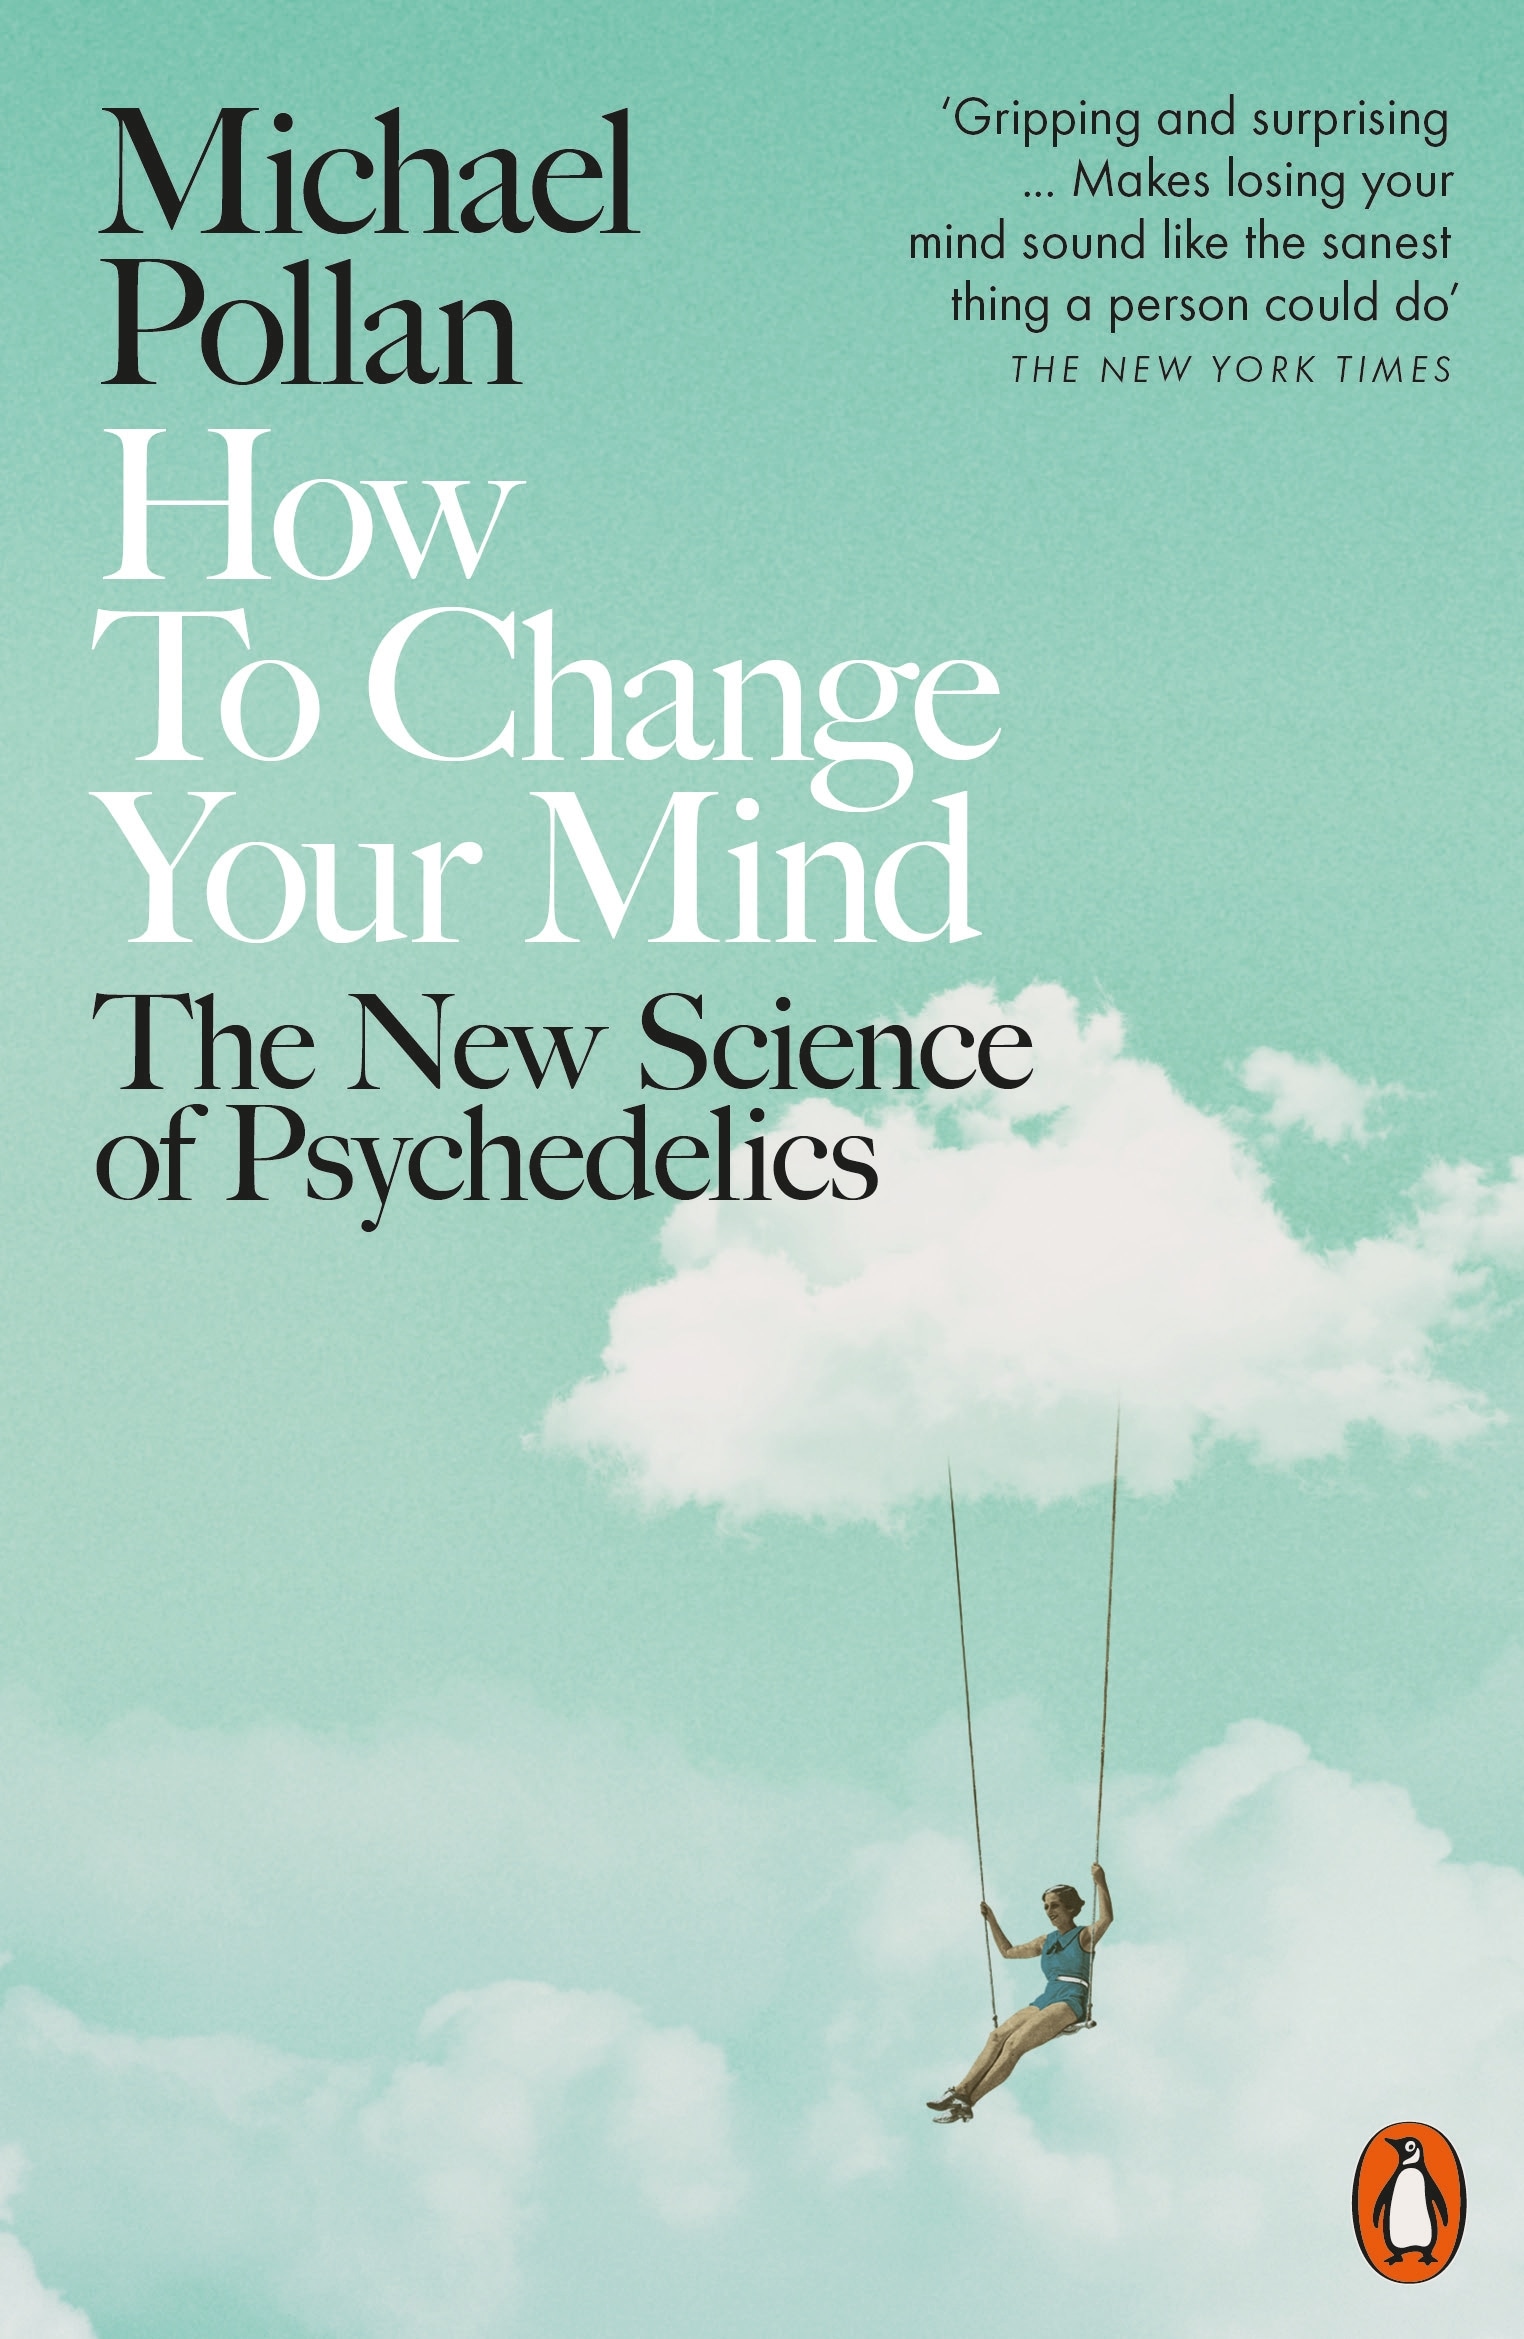 Book “How to Change Your Mind” by Michael Pollan — May 30, 2019